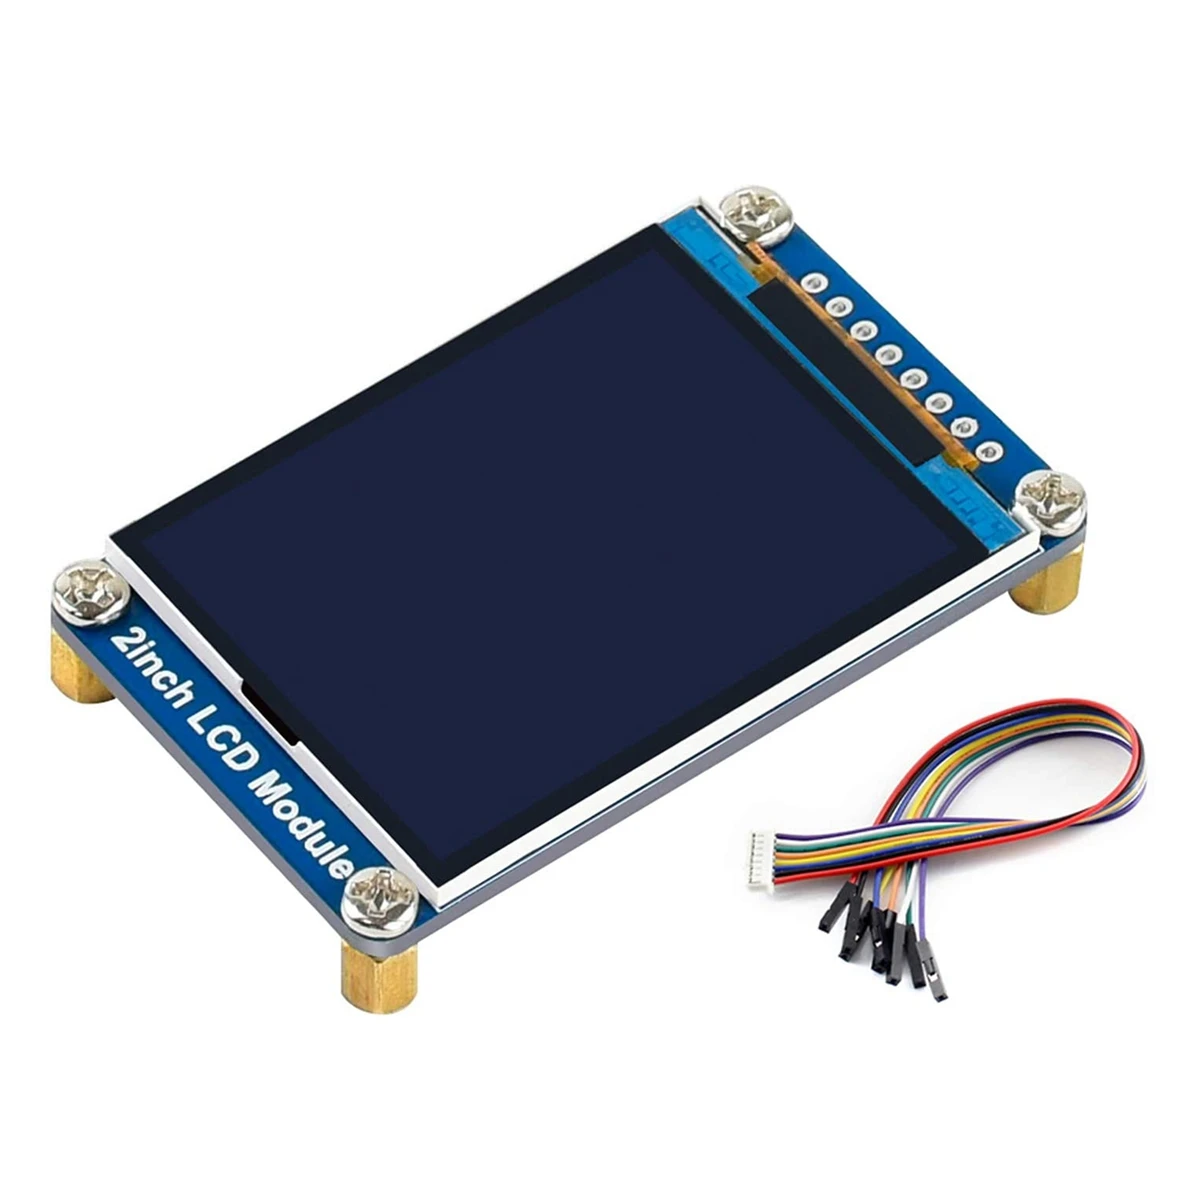 

Waveshare 2Inch IPS LCD Display for Raspberry Pi Pico,65K RGB Colors, 320X240 Pixels, SPI Interface Embedded ST7789VW Driver